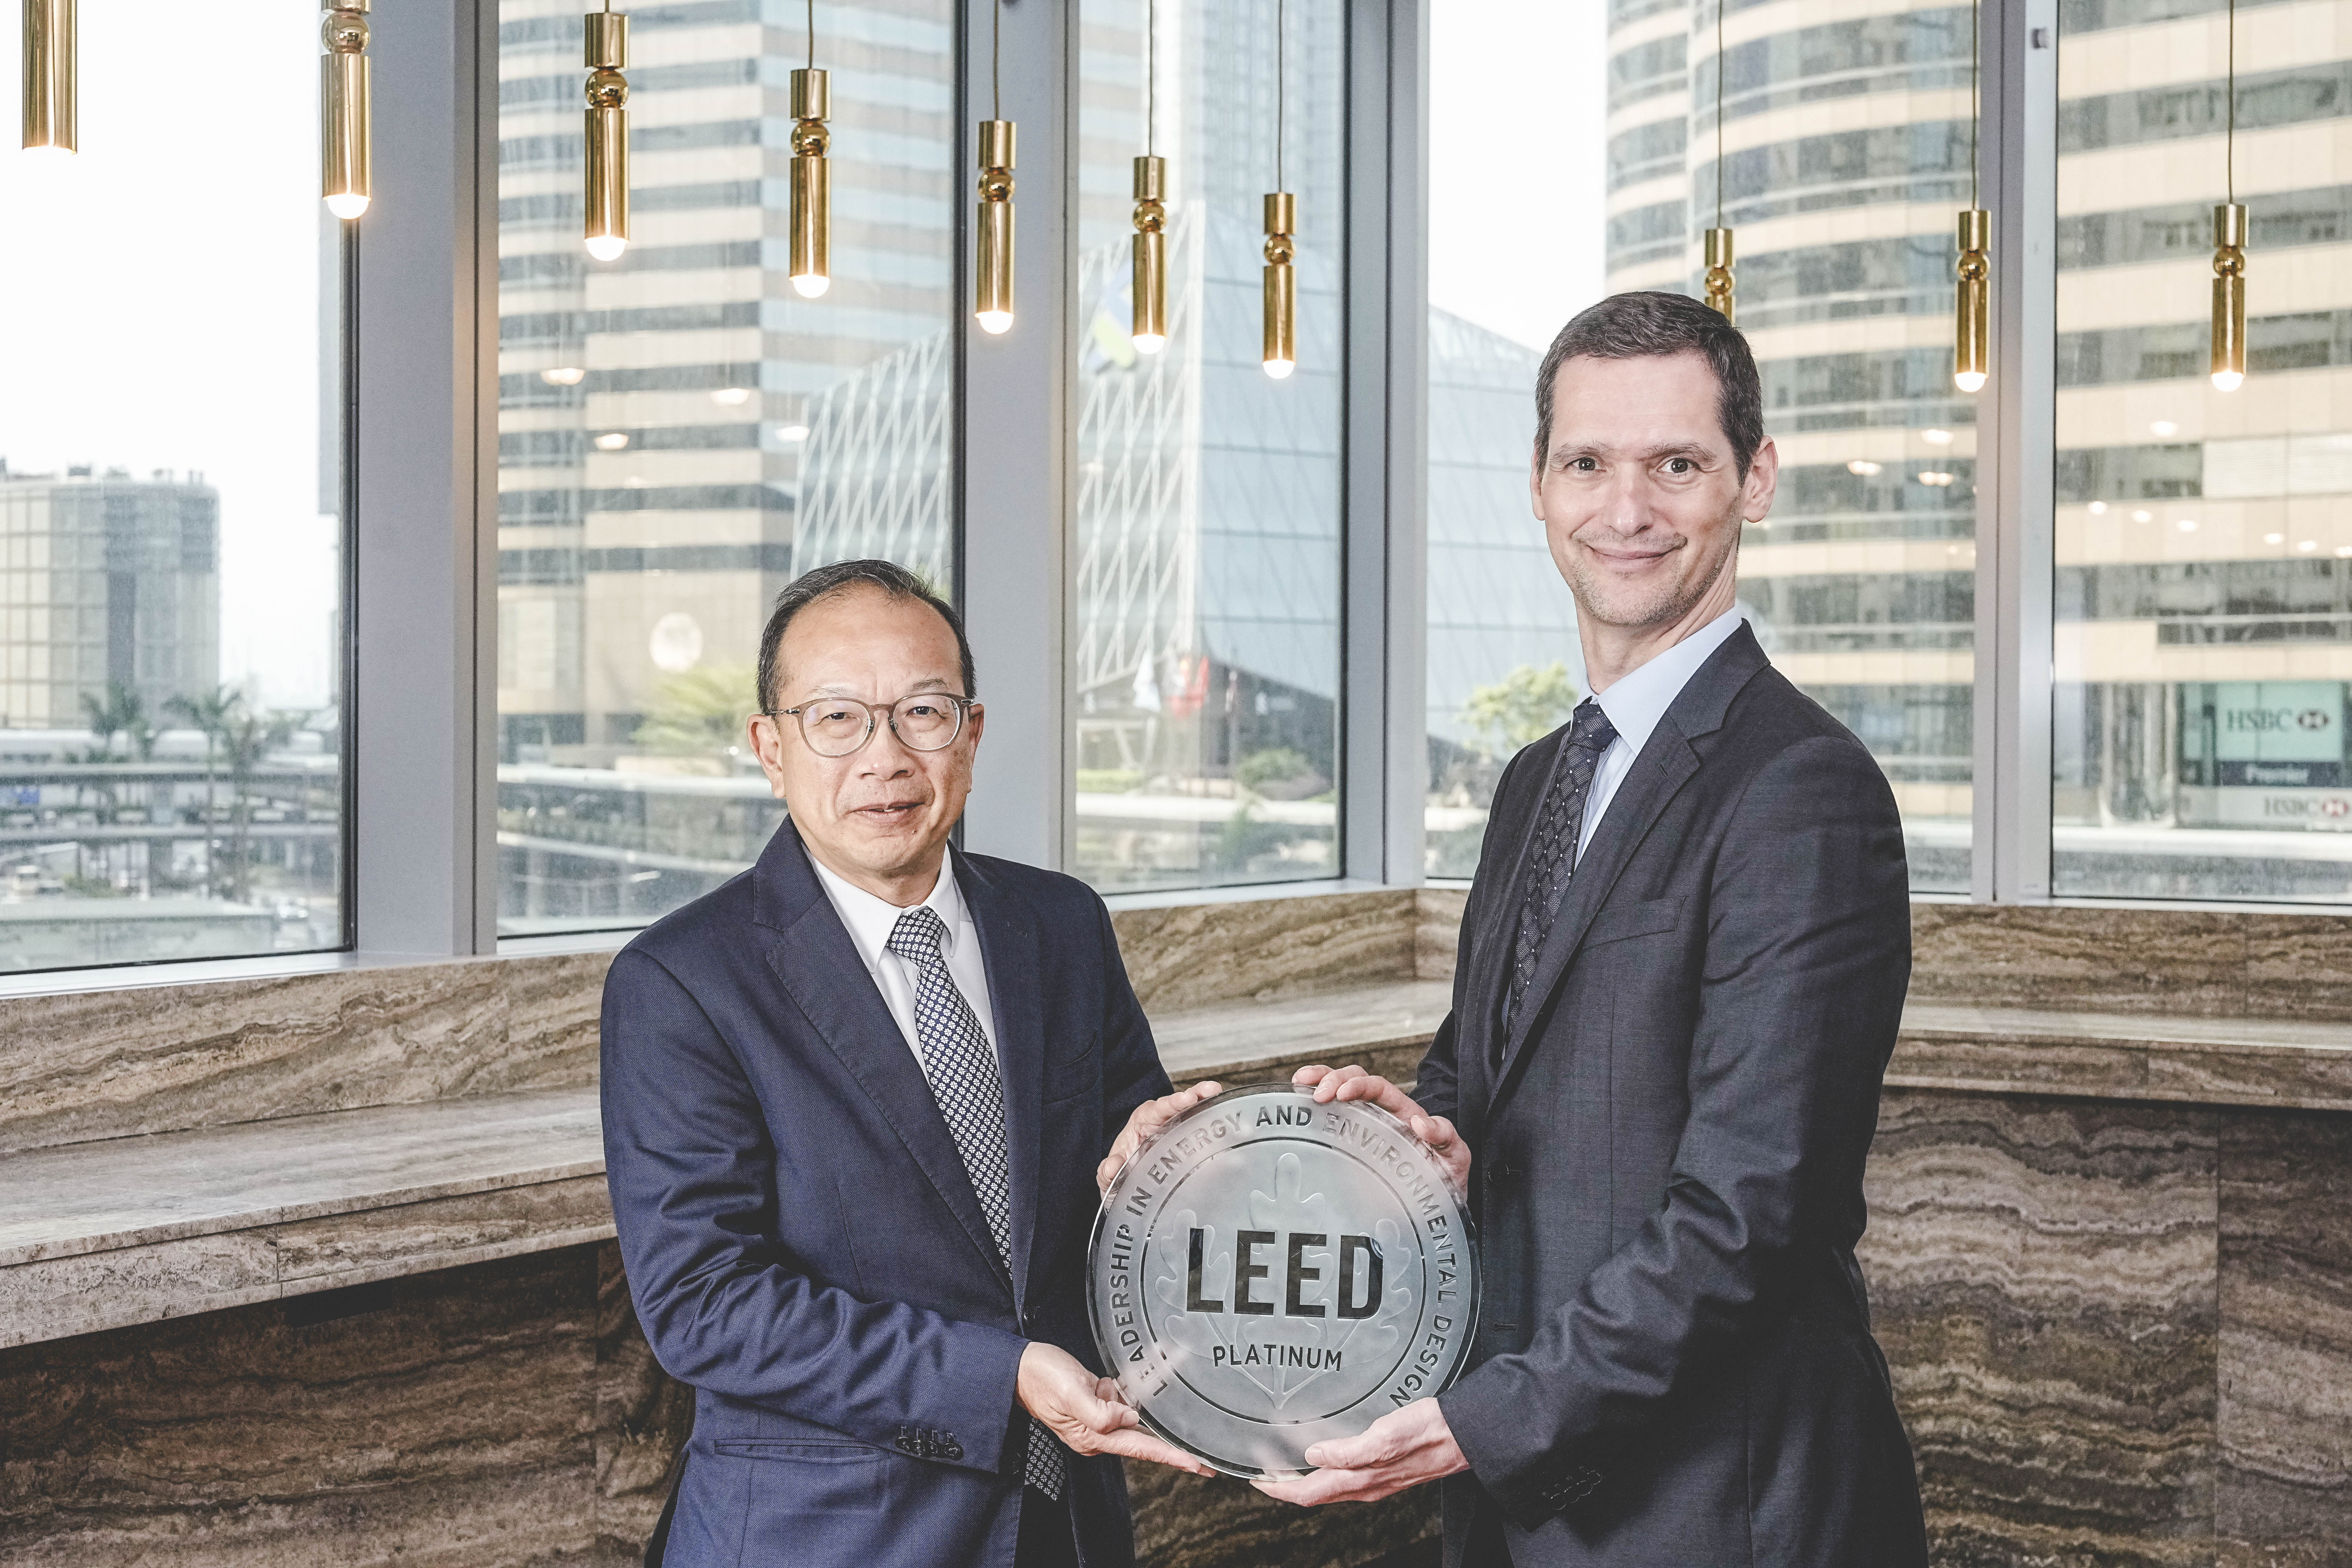 Mr. Kenneth Foo (left), Executive Director at Hongkong Land, receives the LEED Platinum certification under “V4.1 Operation and Maintenance: Existing Buildings” from Mr. Peter Templeton (right), President & CEO at U.S. Green Building Council